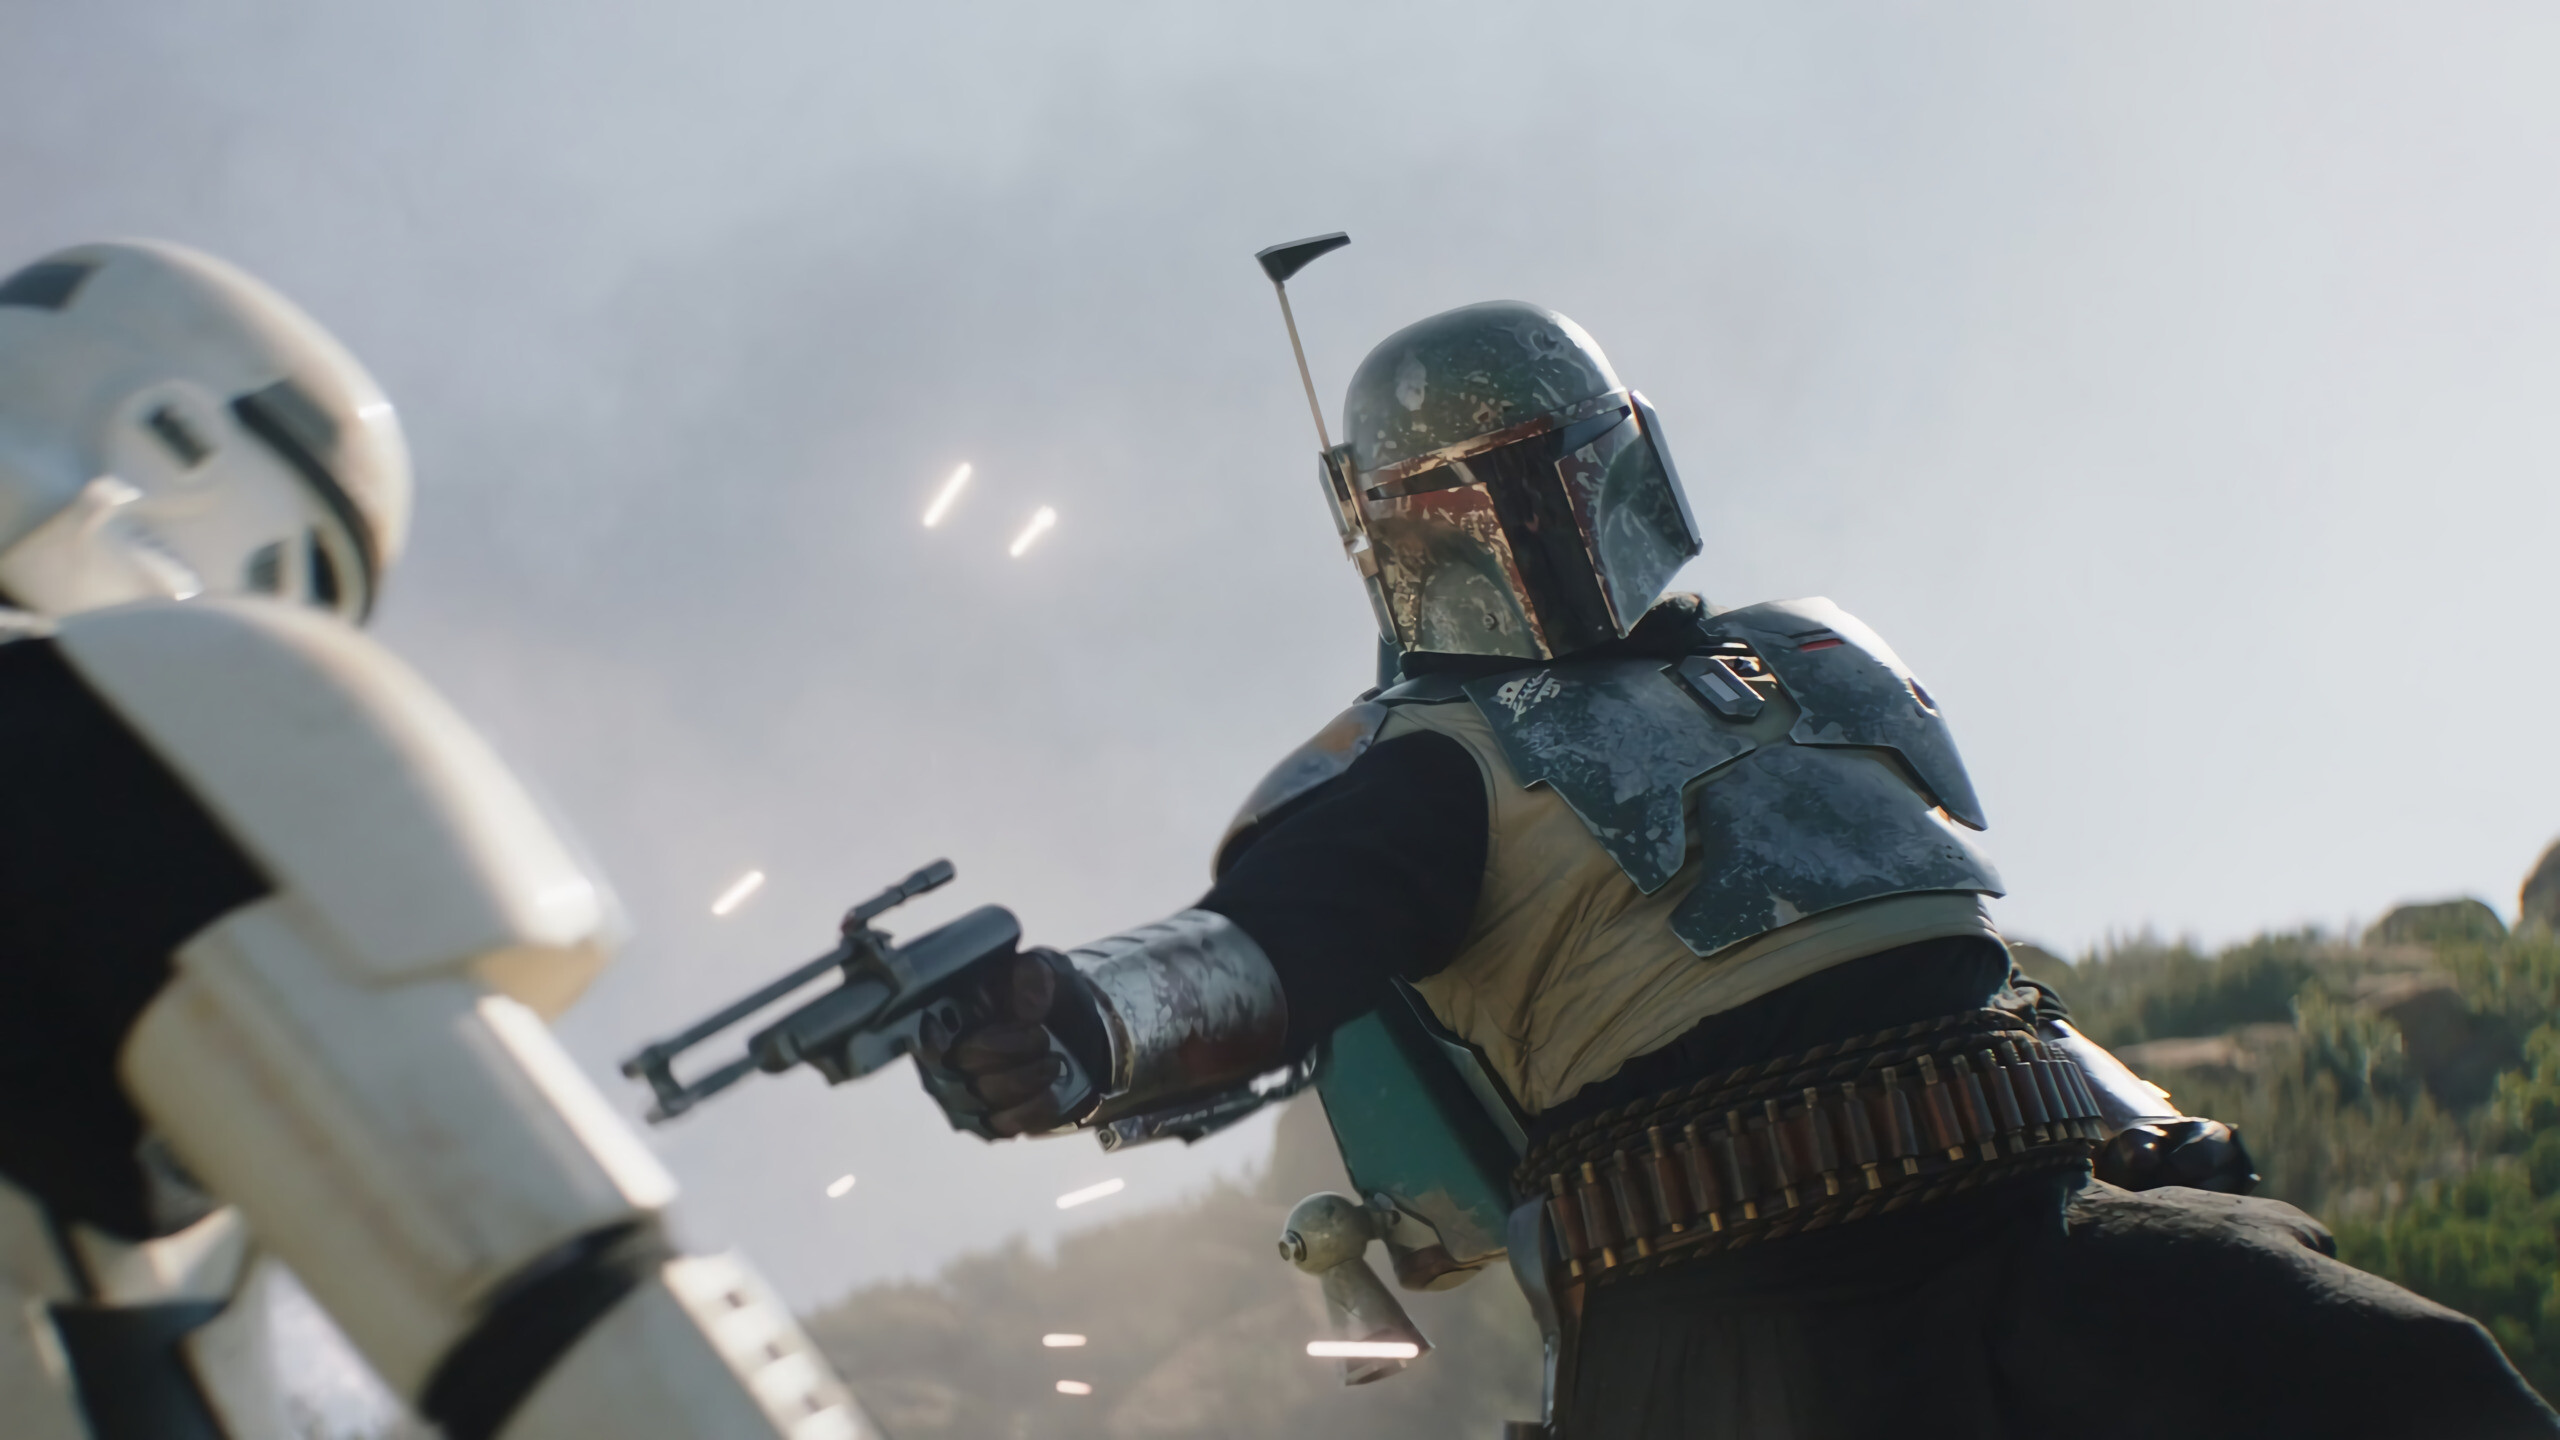 The Book of Boba Fett: Star Wars characters, The Mandalorian, Spin-off. 2560x1440 HD Background.